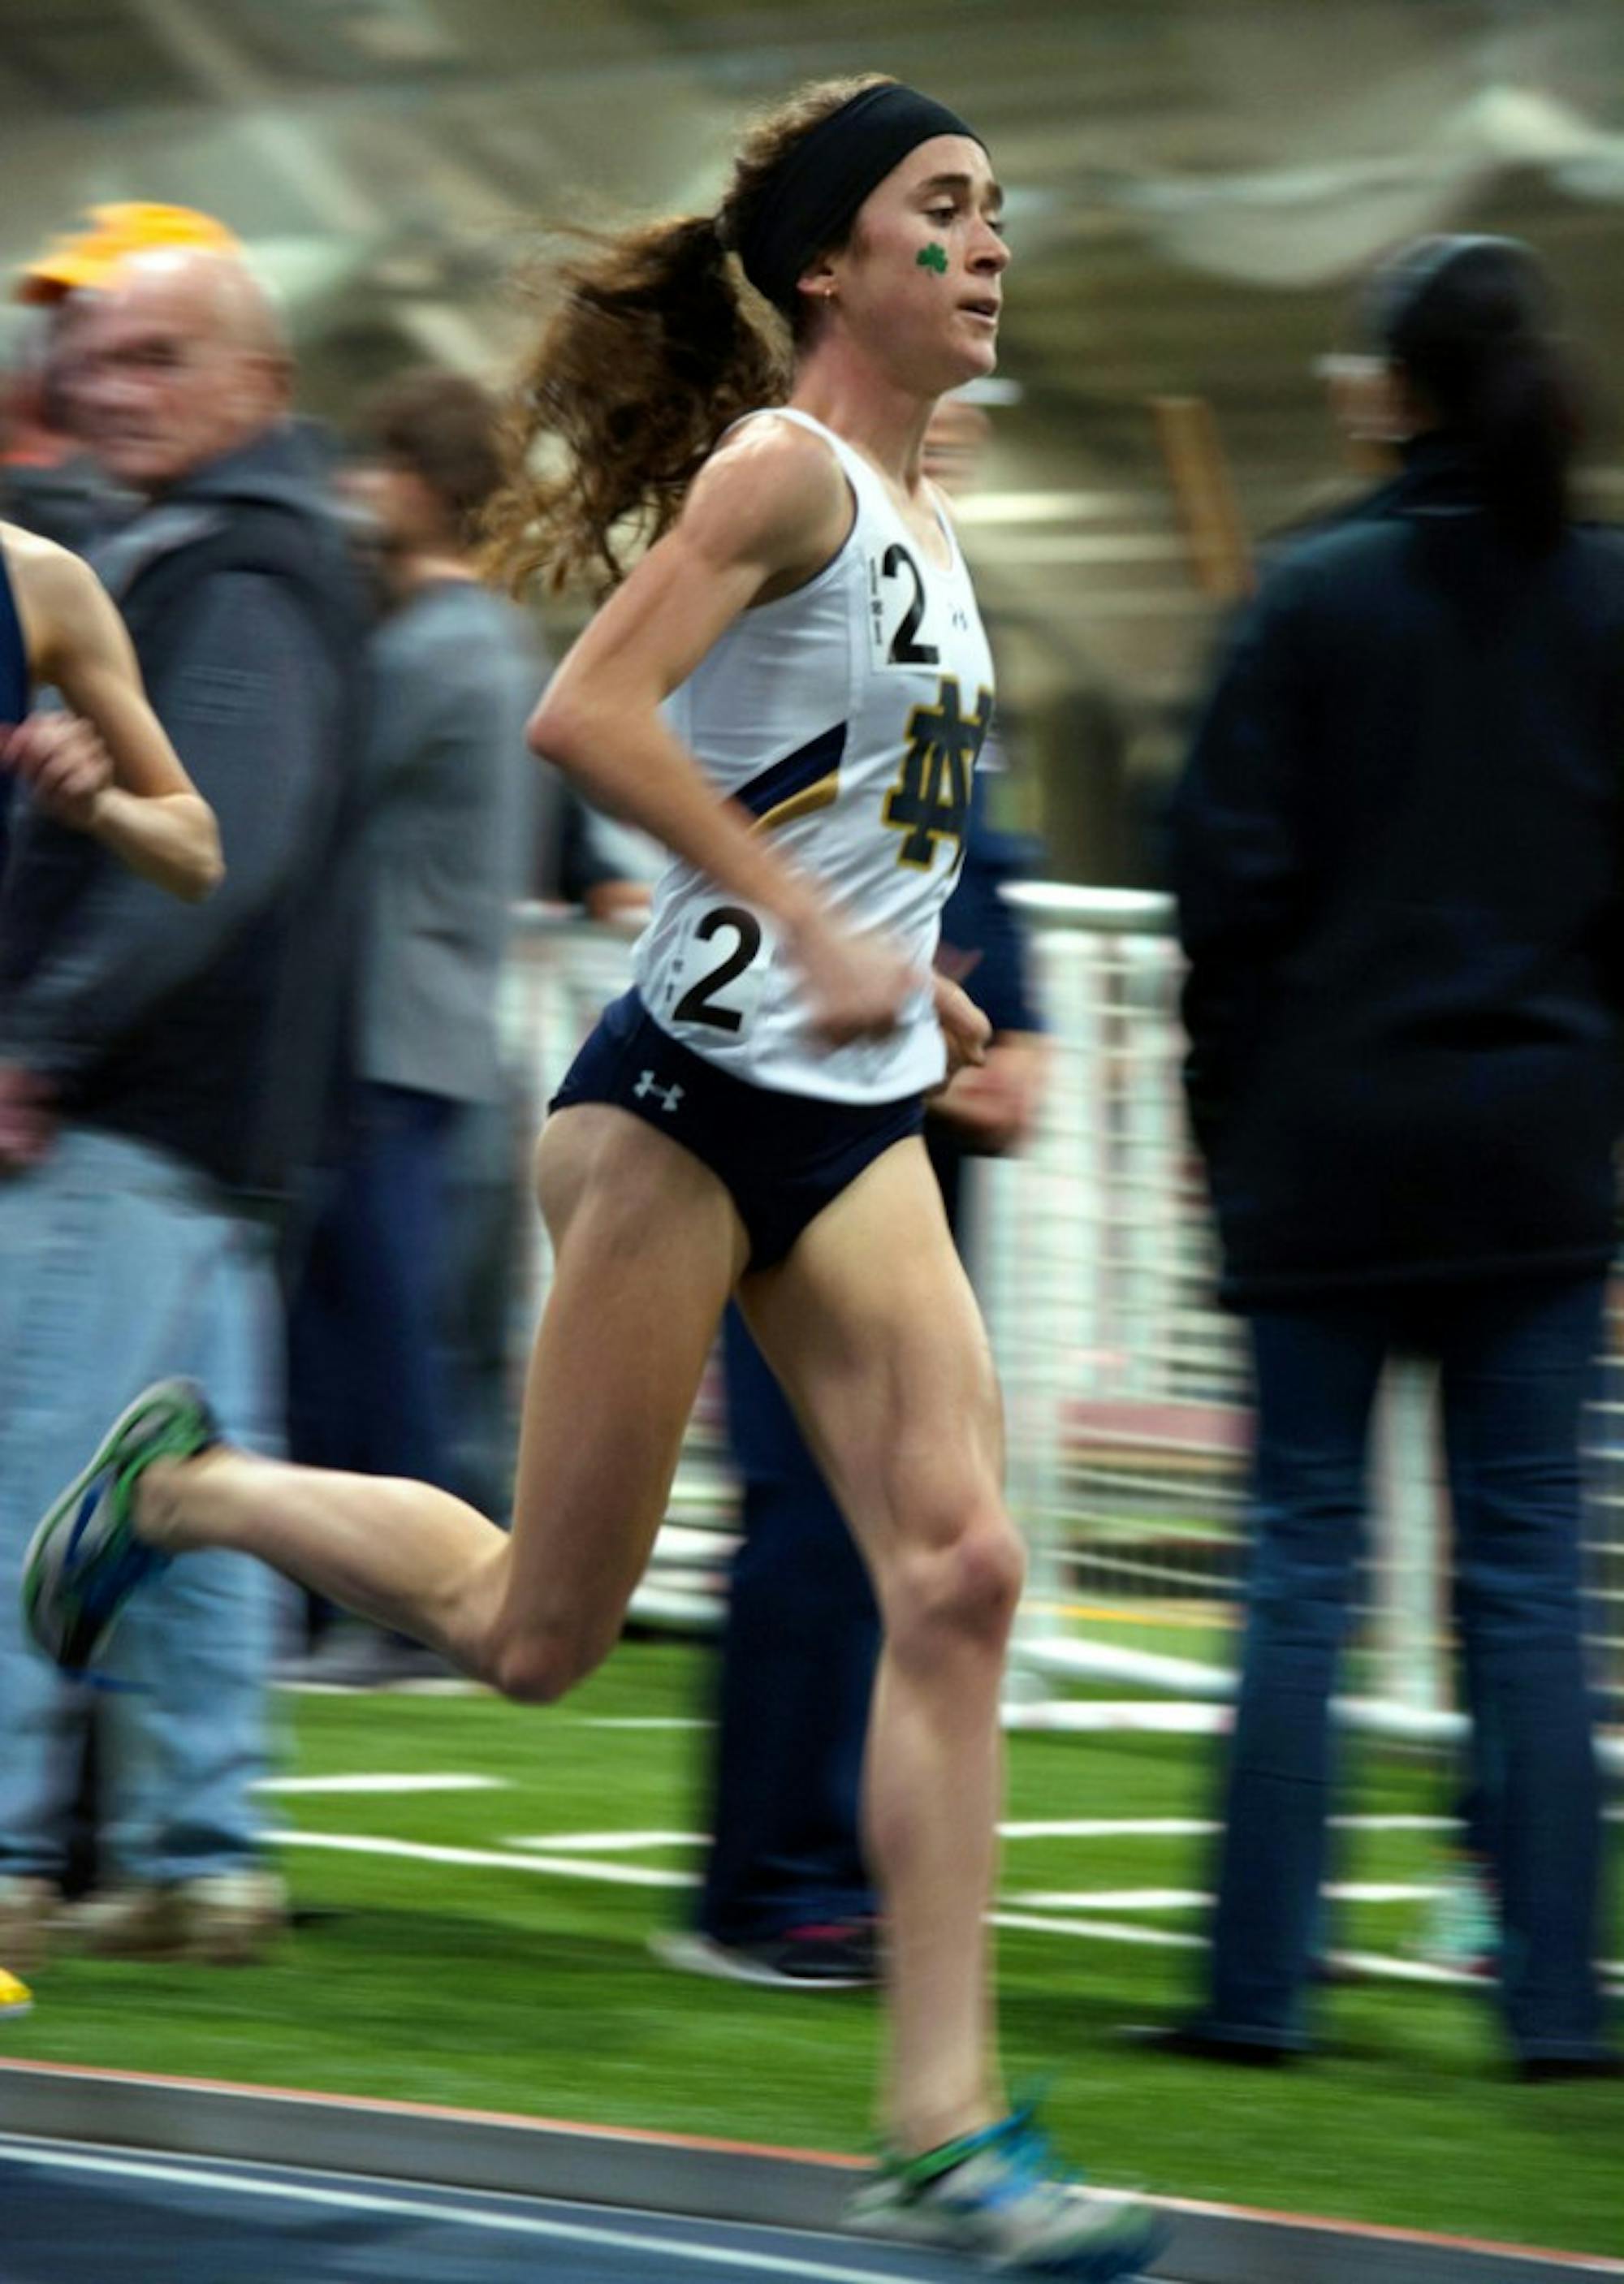 Molly Seidel leads the pack during the 3,000-meter run at the Meyo Invitational on Feb. 6 at Loftus Sports Complex. Seidel is a four-time national champion, with the opportunity to add to that total at the NCAA outdoor championships in Eugene, Oregon, on June 8-11.